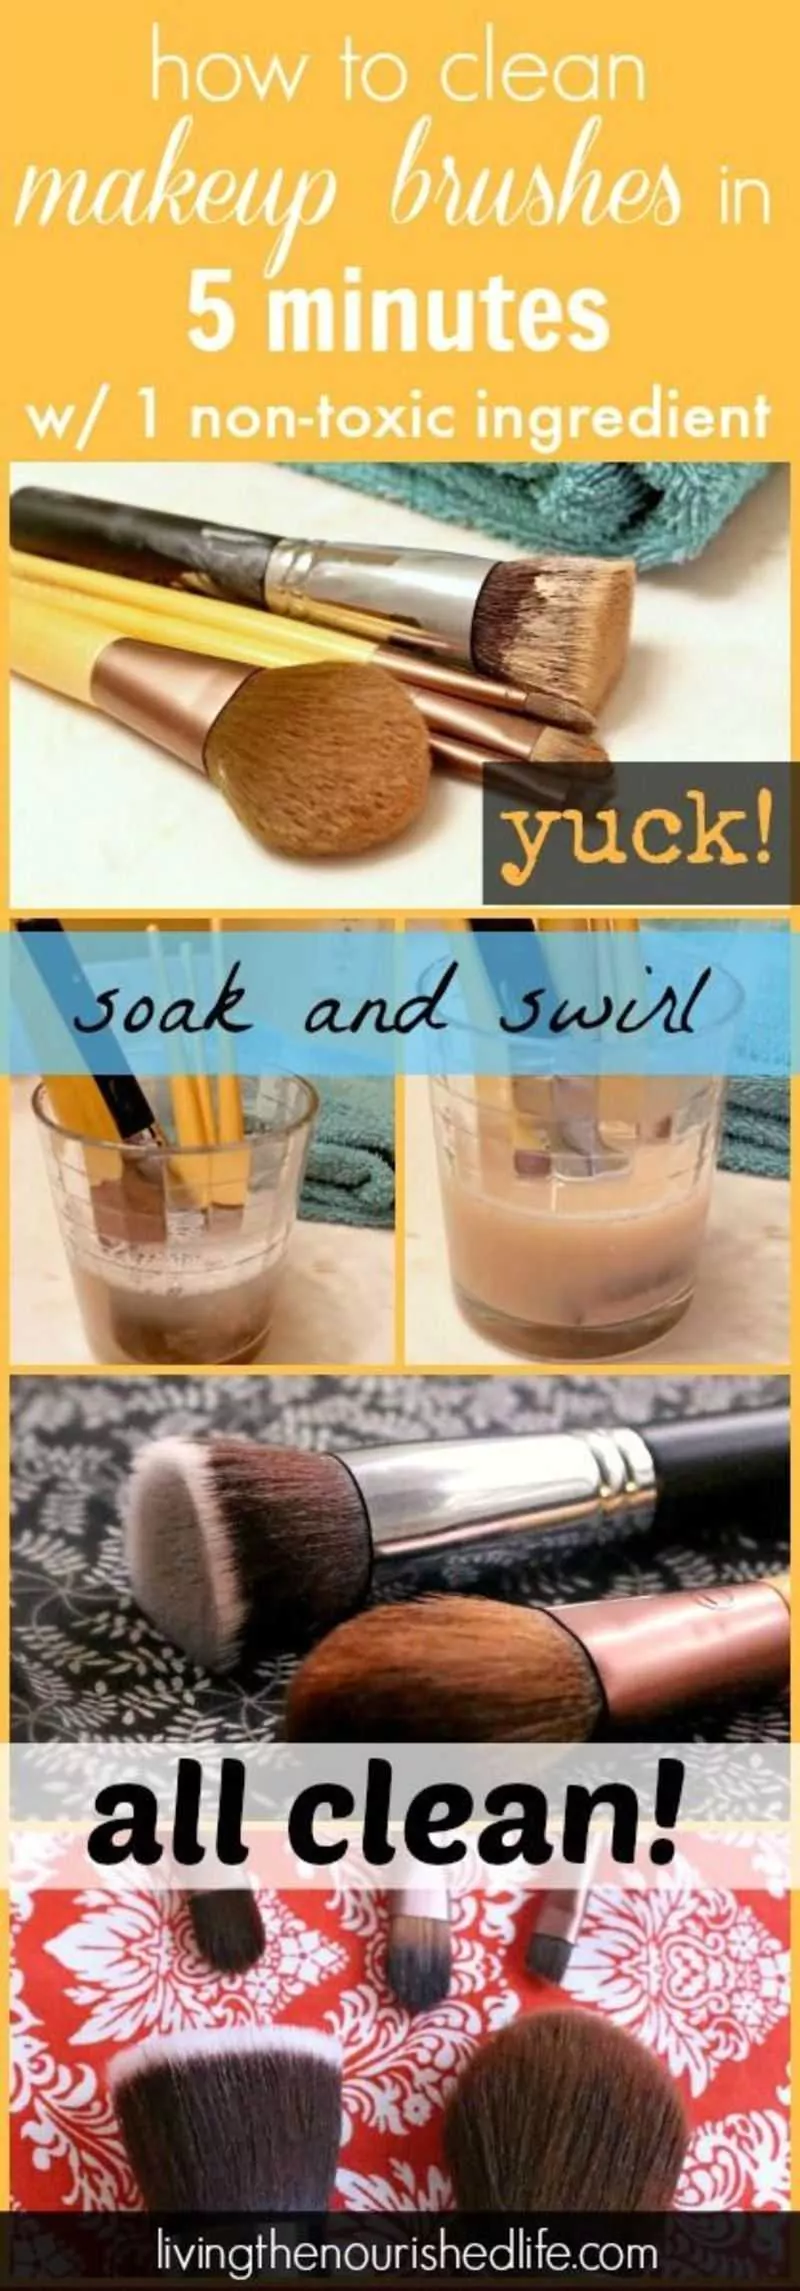 How To Clean Makeup Brushes In 5 Minutes